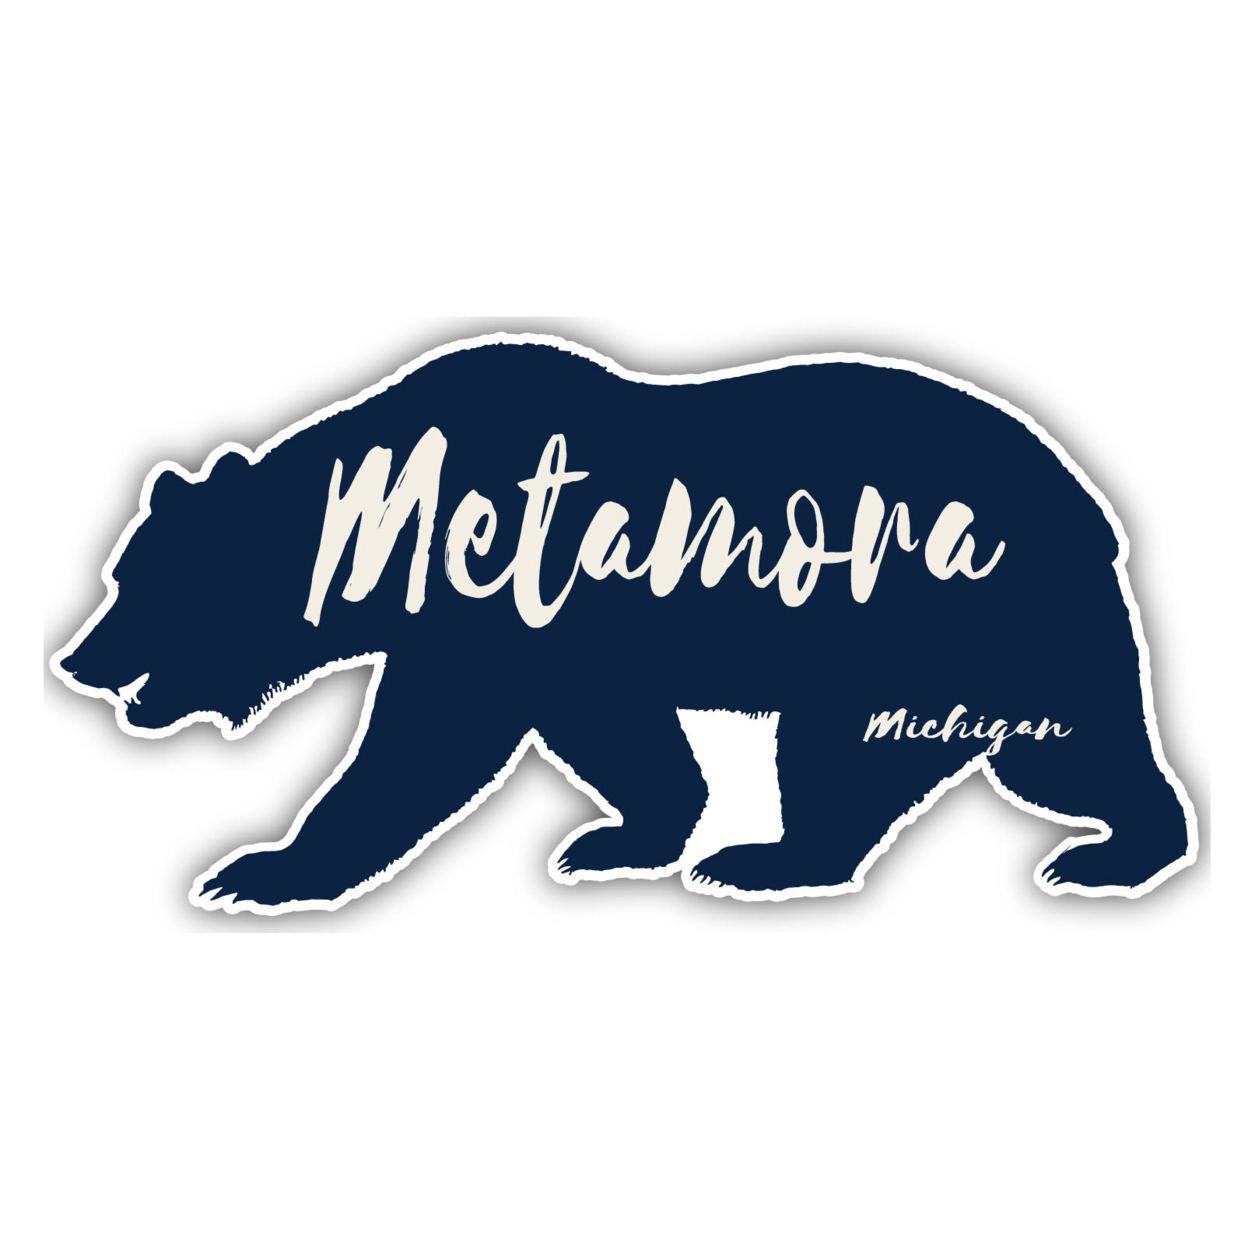 Metamora Michigan Souvenir Decorative Stickers (Choose Theme And Size) - 2-Inch, Great Outdoors